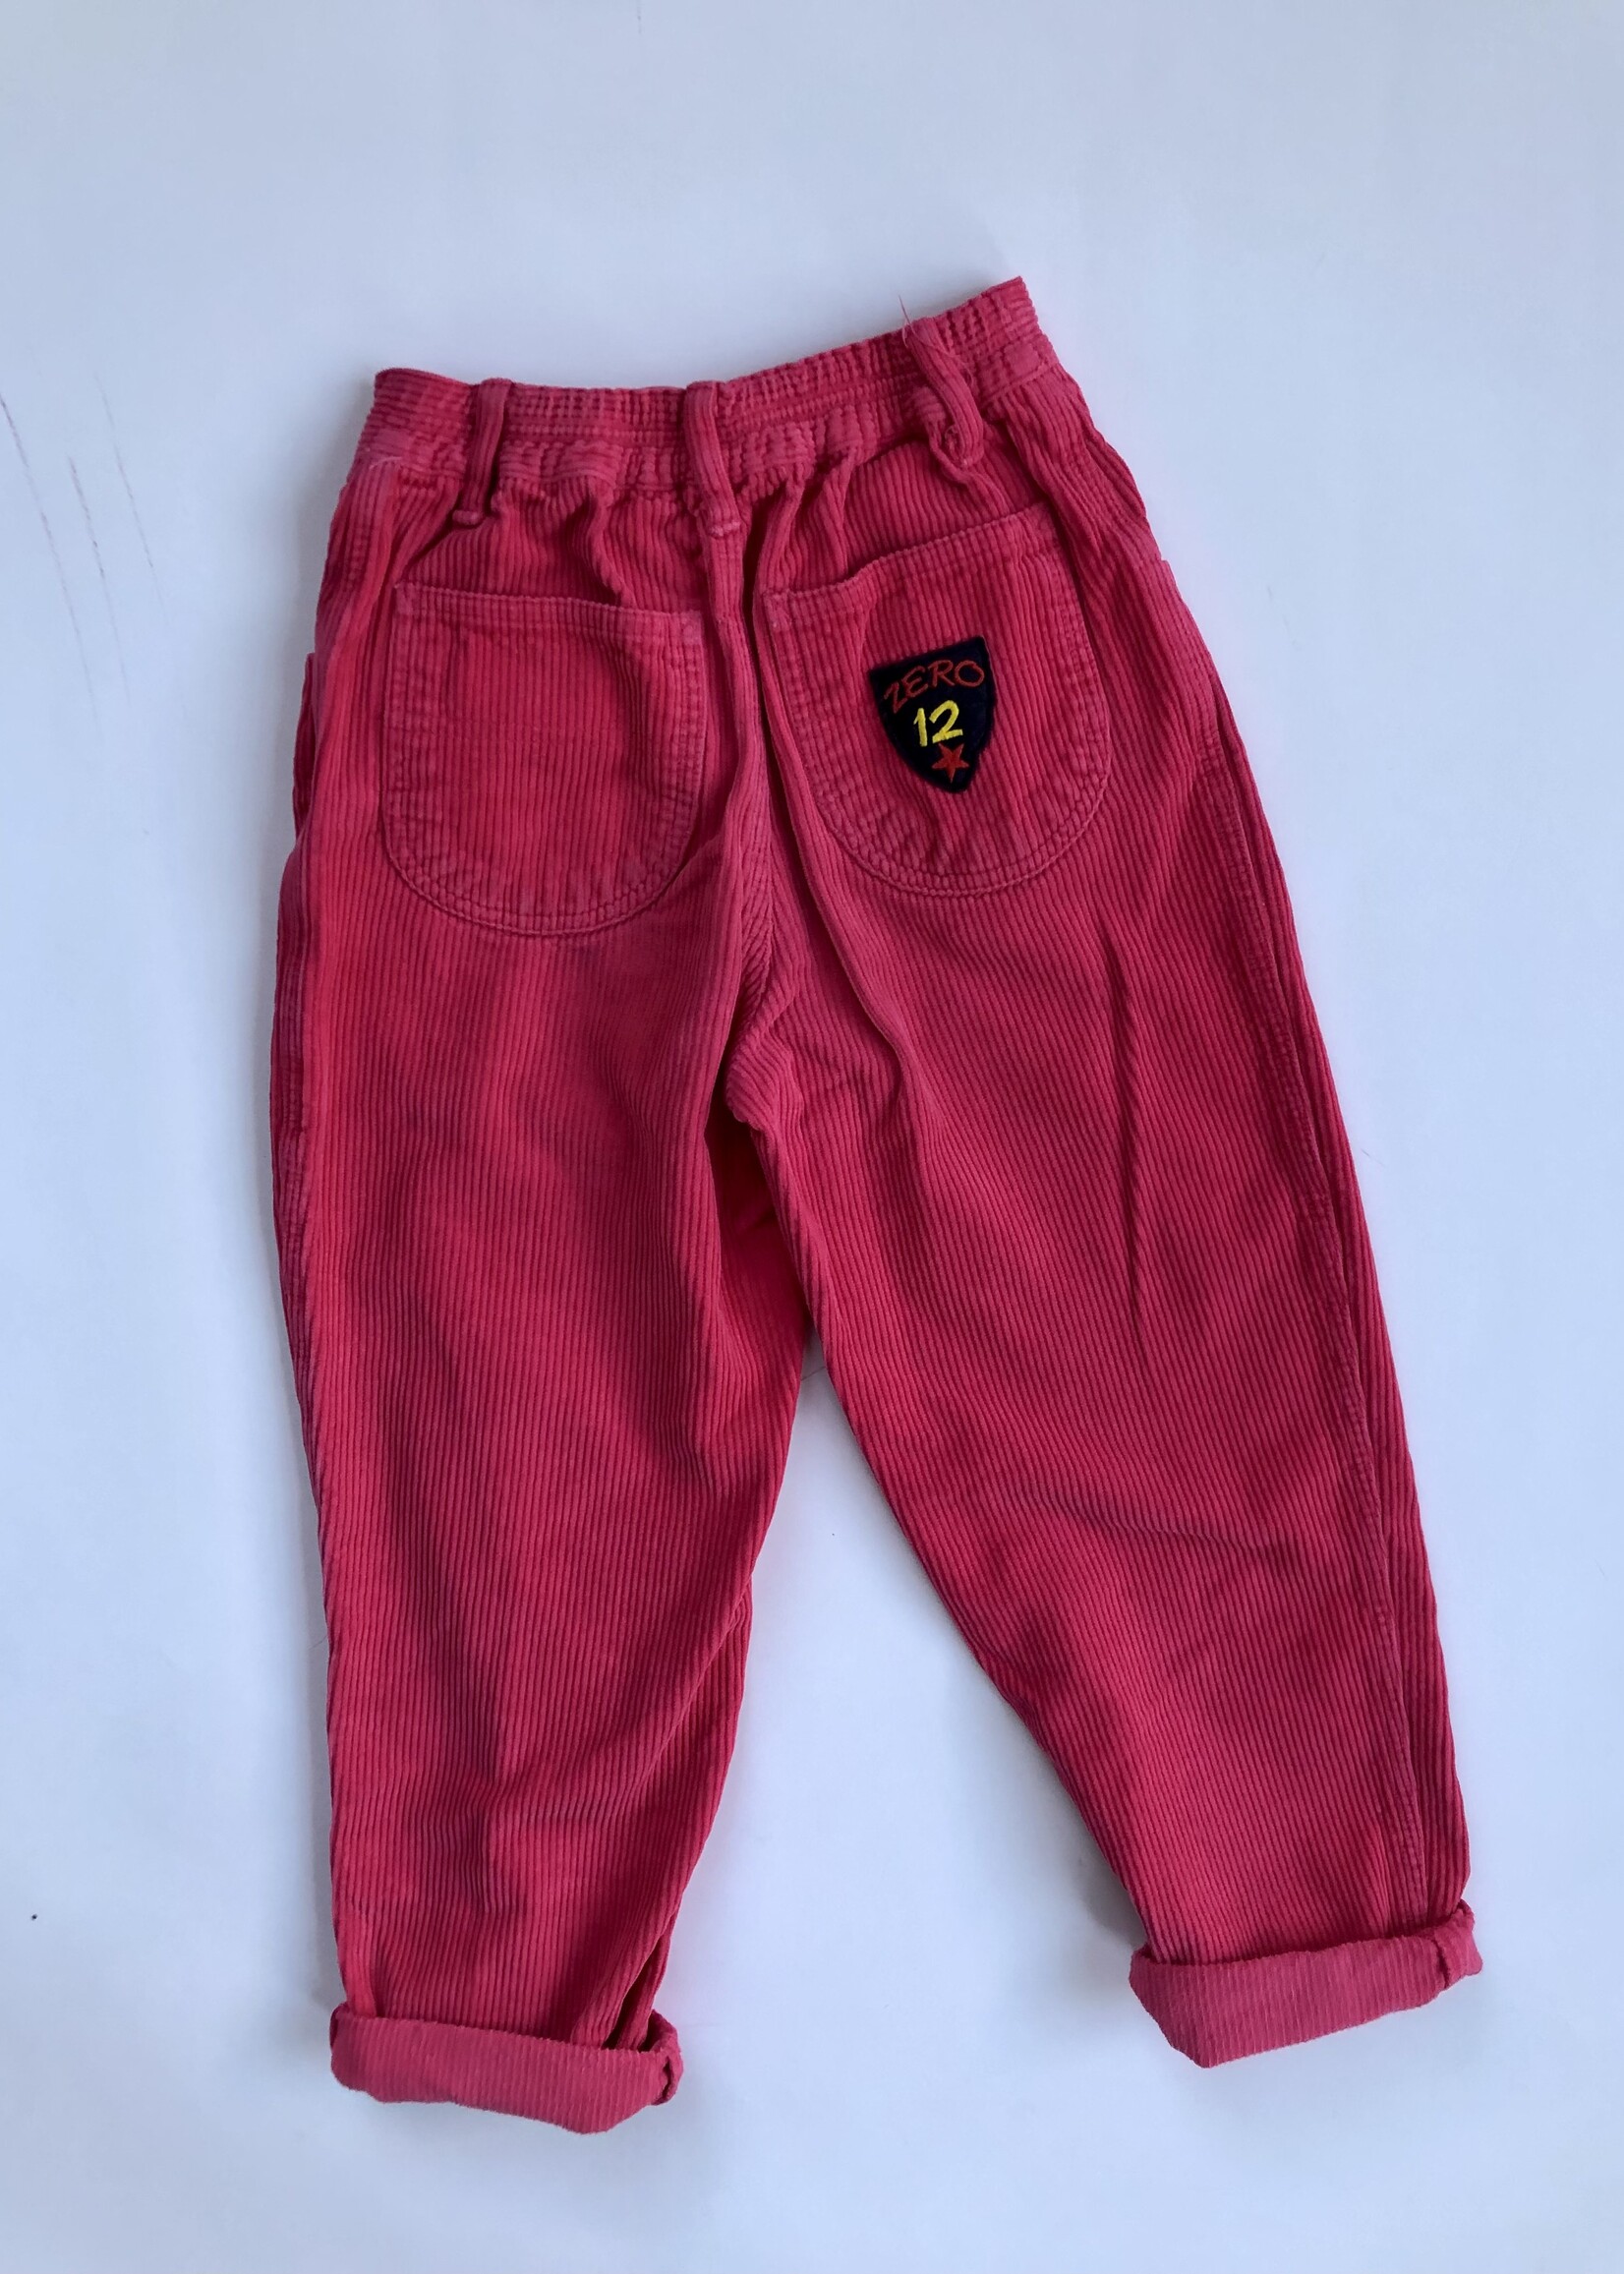 United Colors of Benetton Bright pink corduroy pants 7-8y